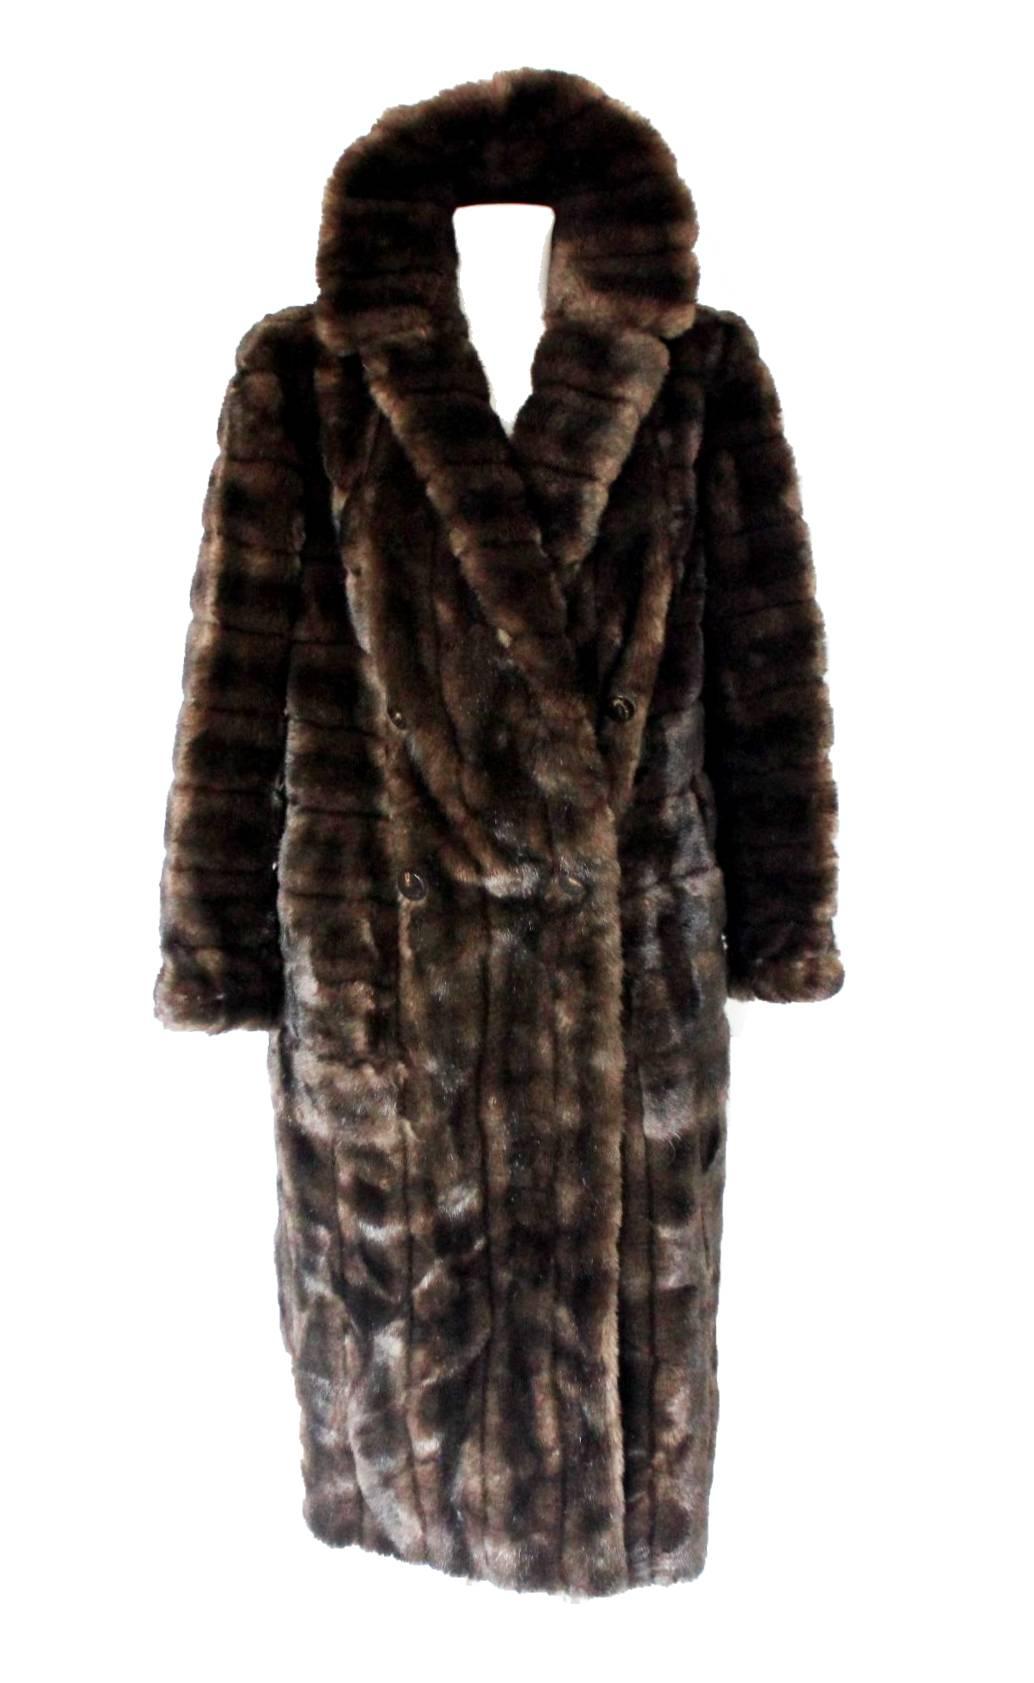 ULTRARARE COLLECTOR'S ITEM

GUCCI

GORGEOUS BROWN FAUX SABLE FUR COAT

BY TOM FORD 

FOR HIS ICONIC FALL WINTER 1996  COLLECTION FOR GUCCI

ULTRAFAMOUS

FALL 1996 RUNWAY COLLECTION SHOW

SOLD OUT IMMEDIATELY

DETAILS:
Beautiful GUCCI by Tom Ford